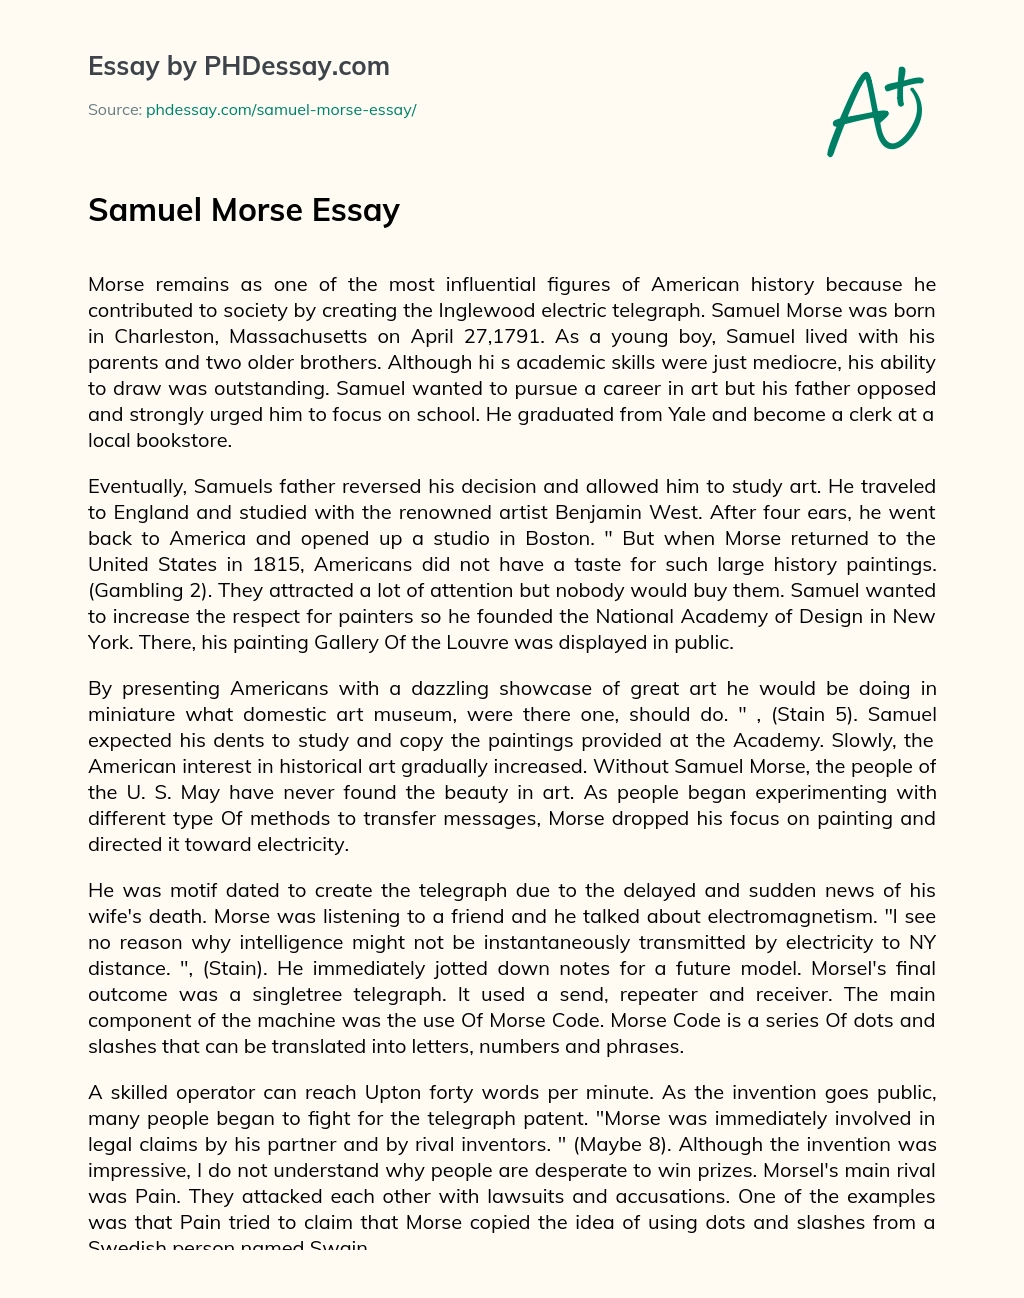 Реферат: Samuel Morse Essay Research Paper Early Life